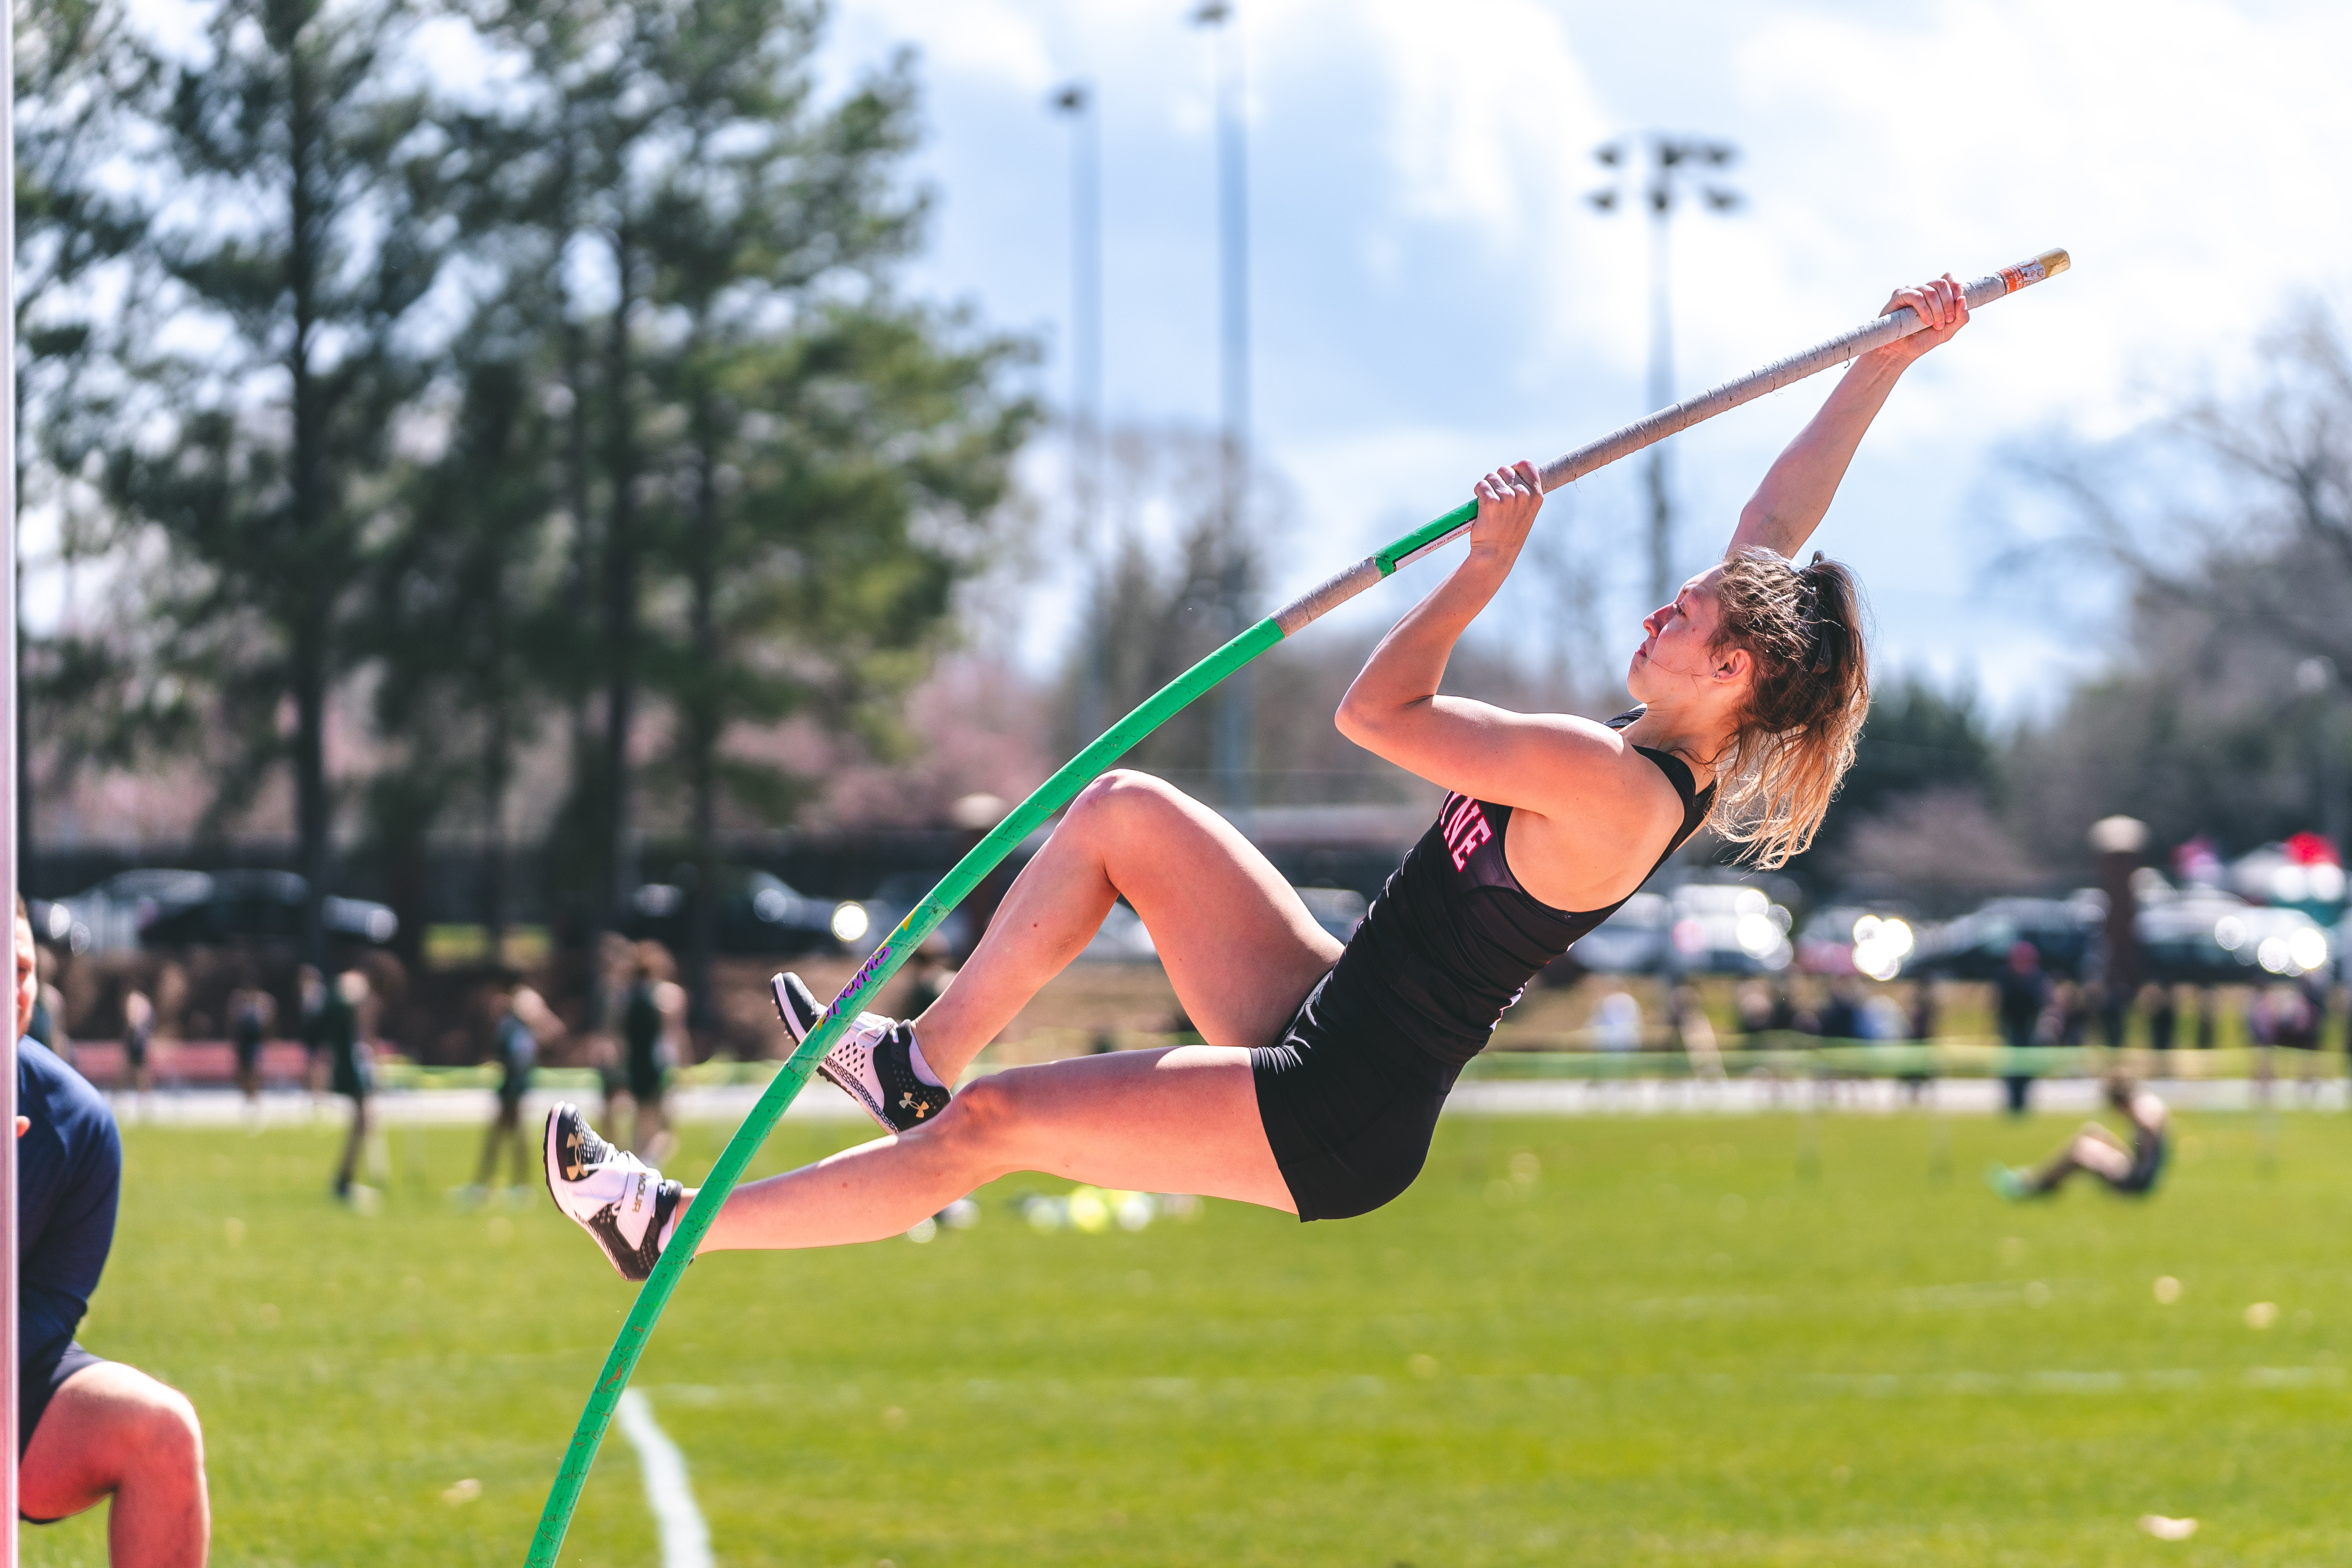 Lacey Triplett prepares to pole vault during an outdoor meet